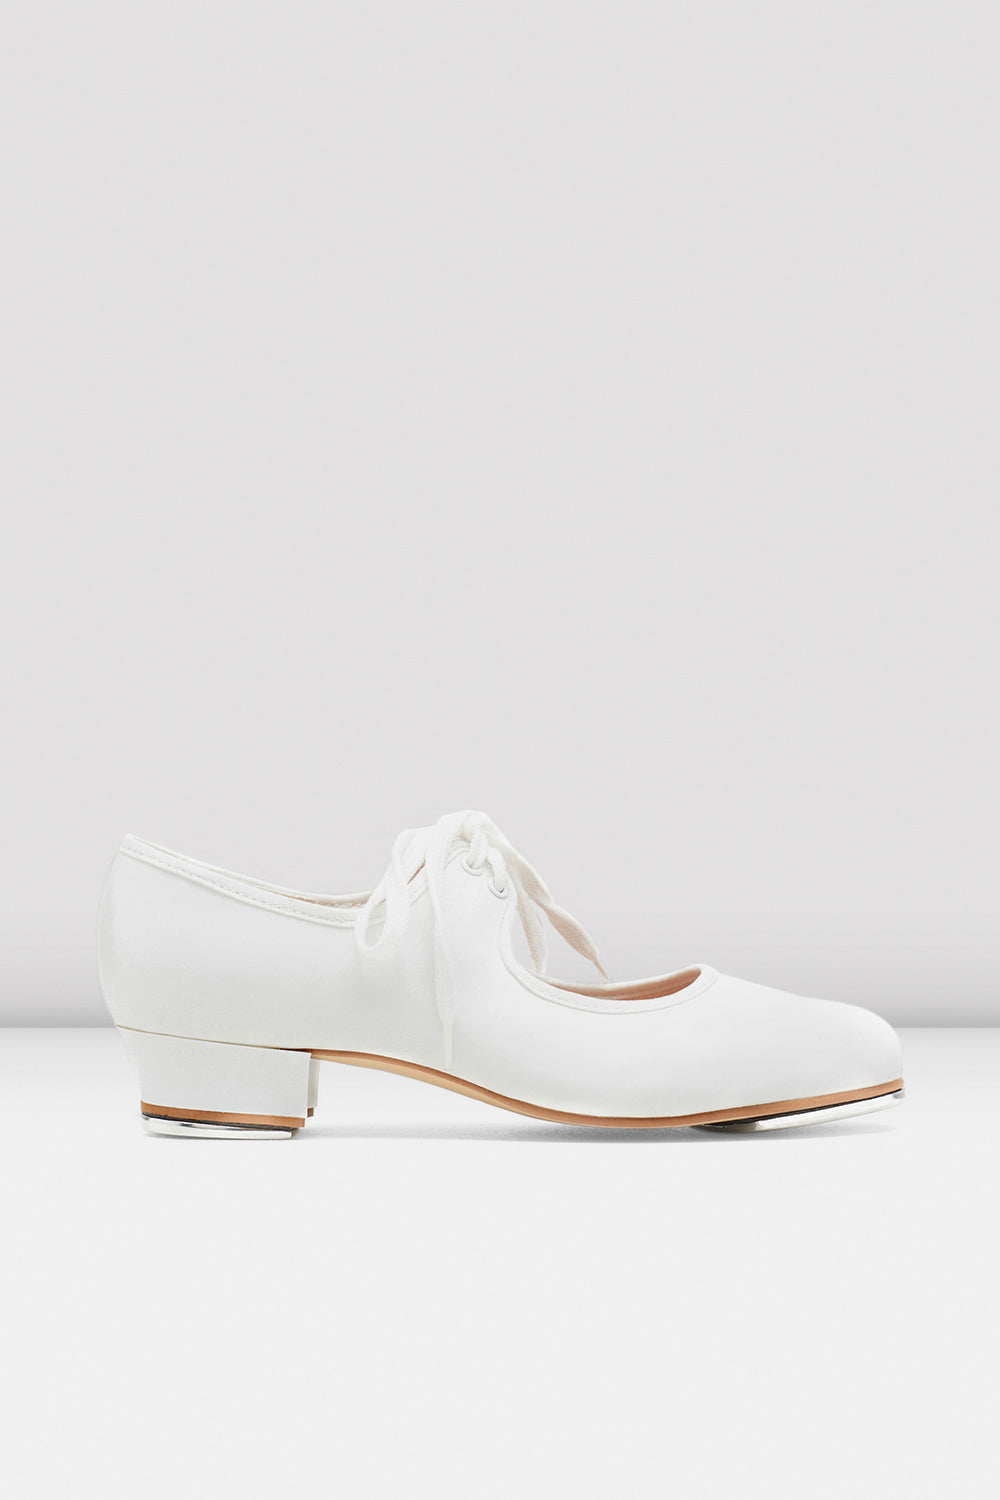 BLOCH Ladies Timestep Tap Shoe, White Synthetic Leather